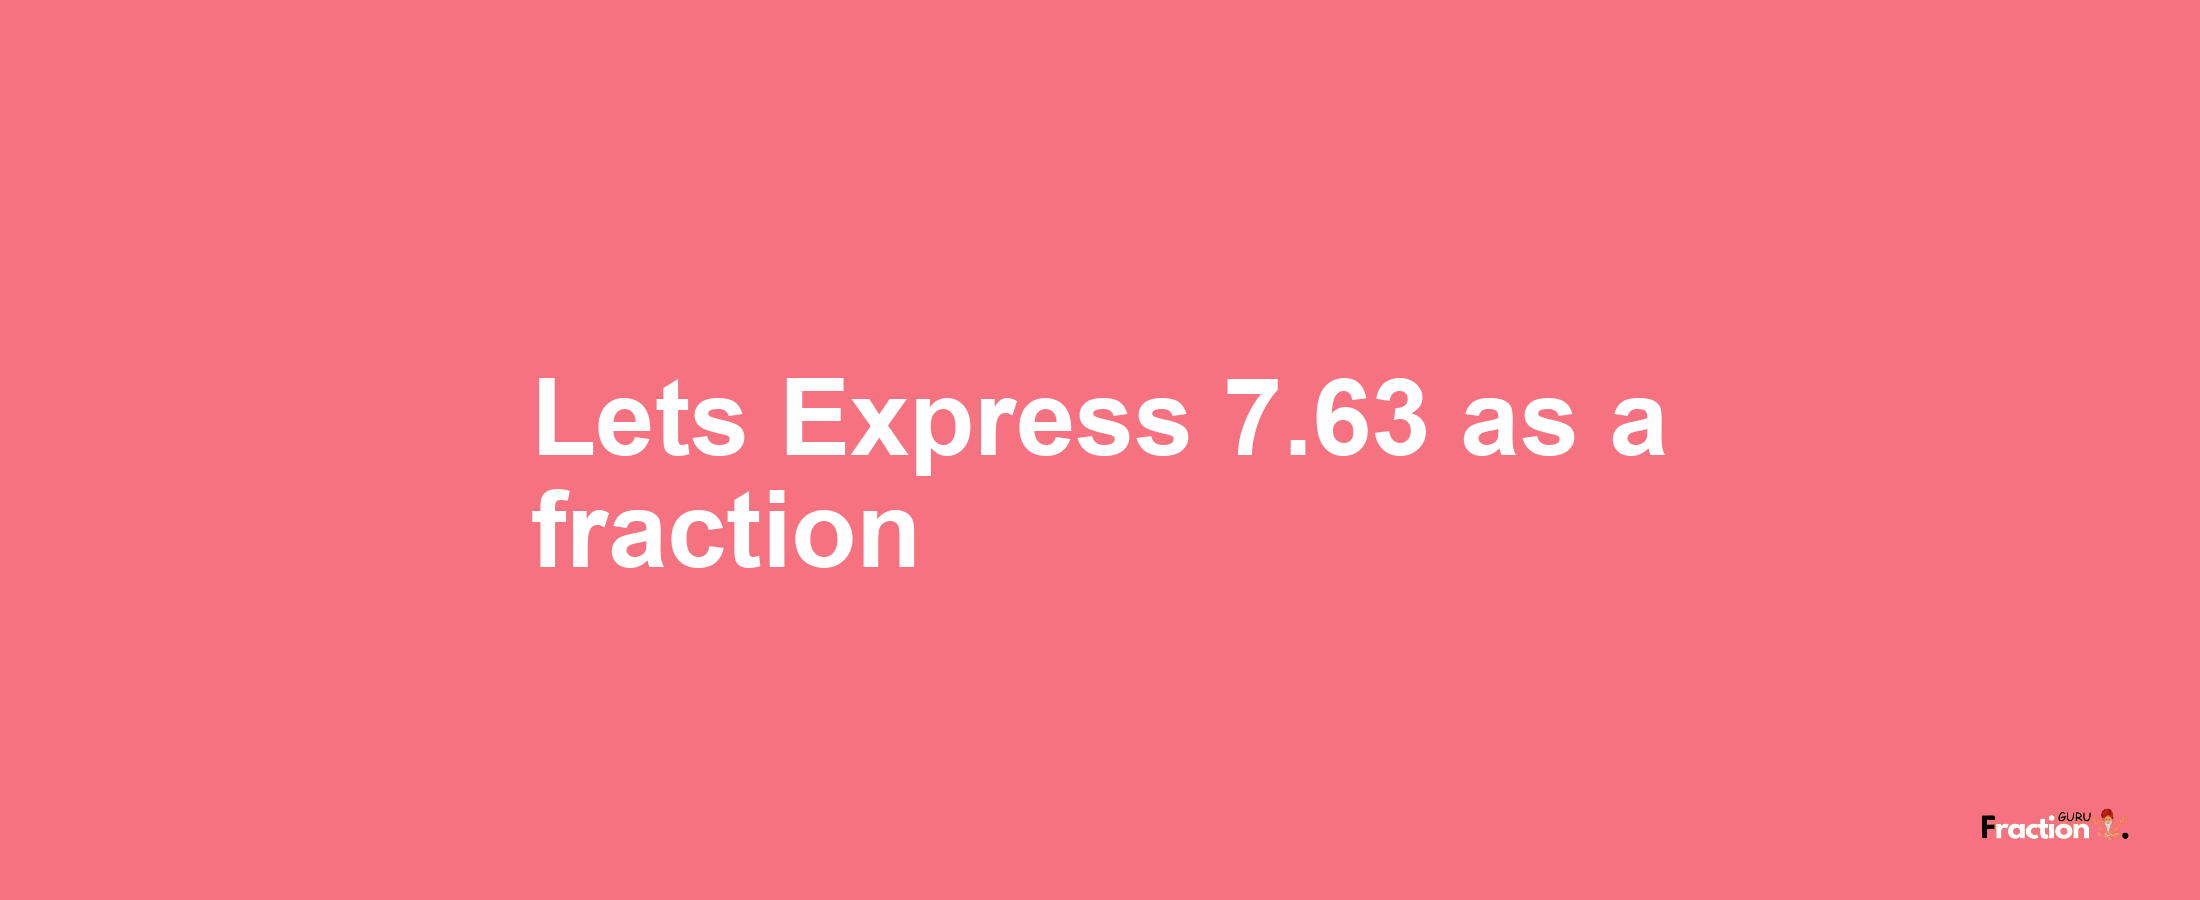 Lets Express 7.63 as afraction